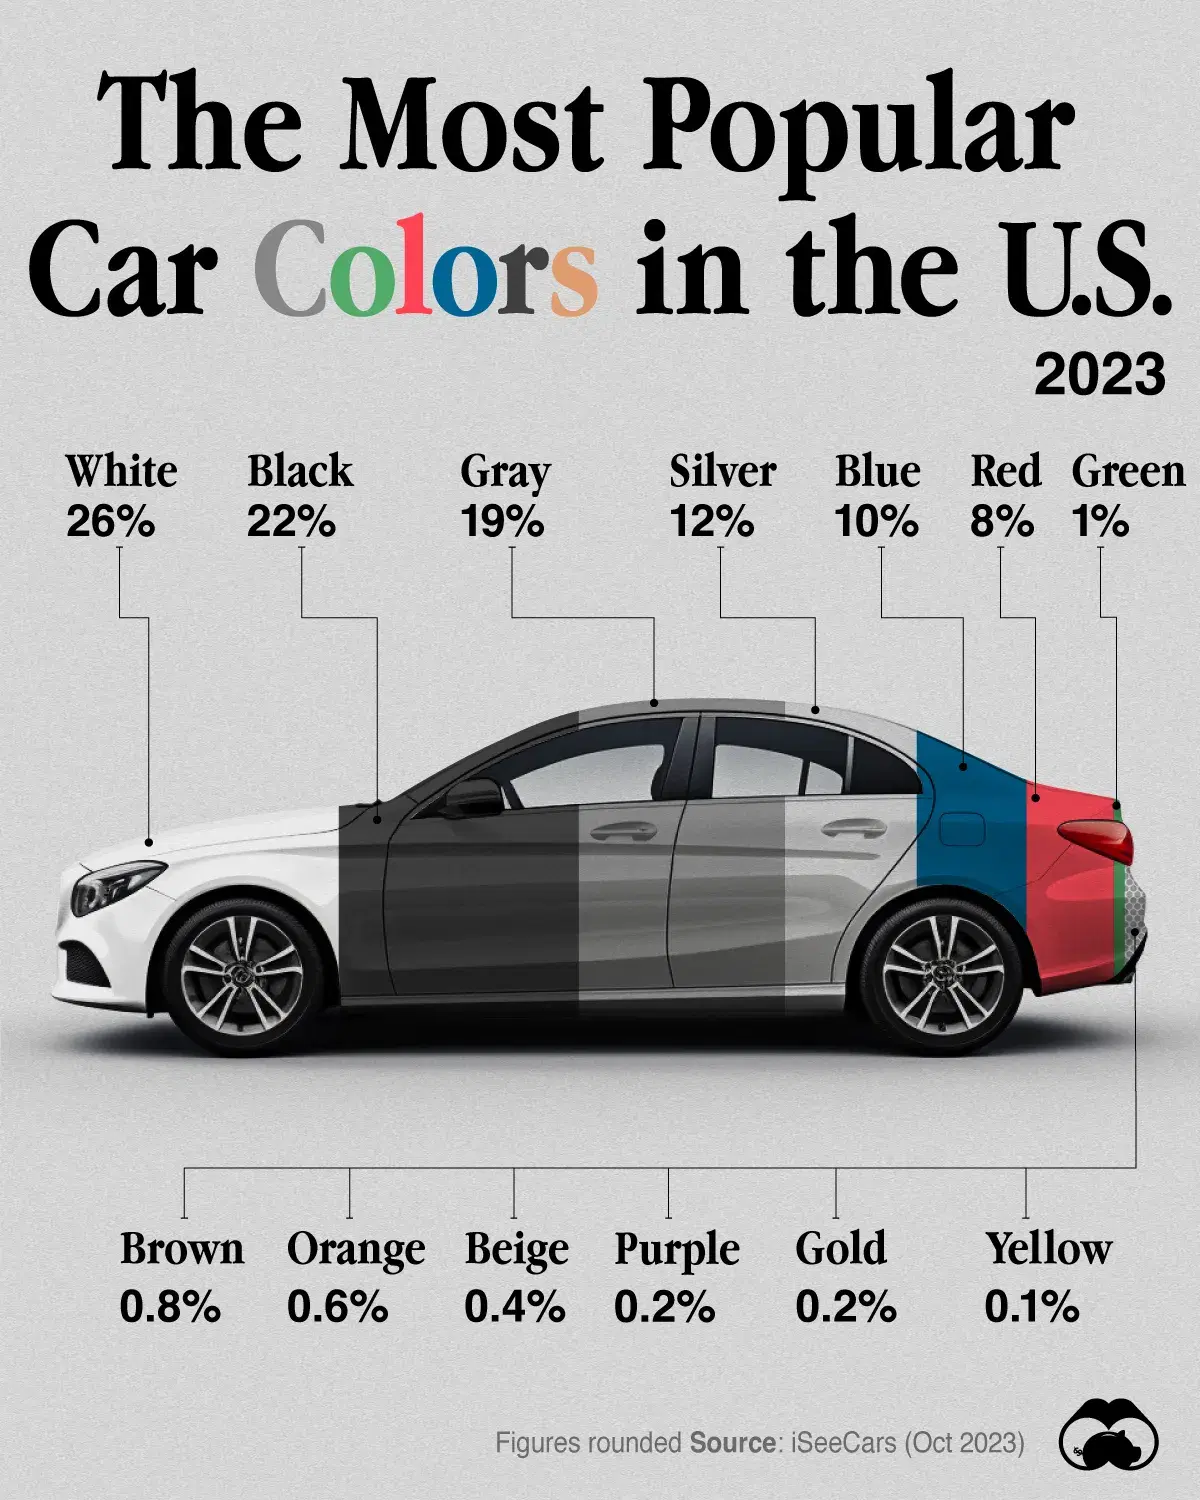 79% Of Cars in the U.S. Are White, Black, Grey, or Silver